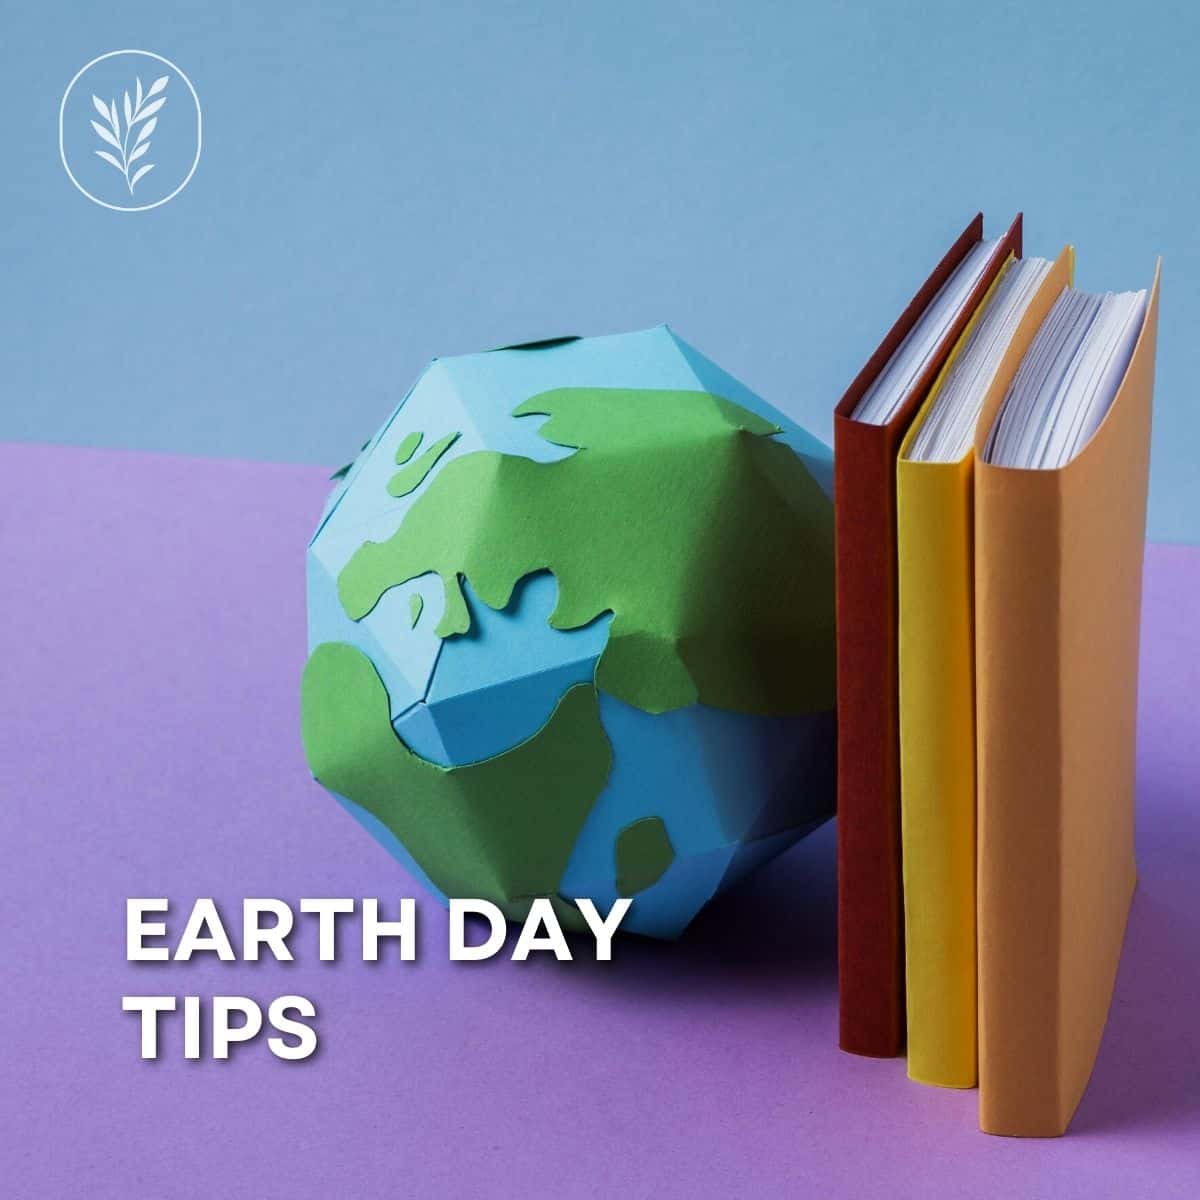 Earth day tips via @home4theharvest